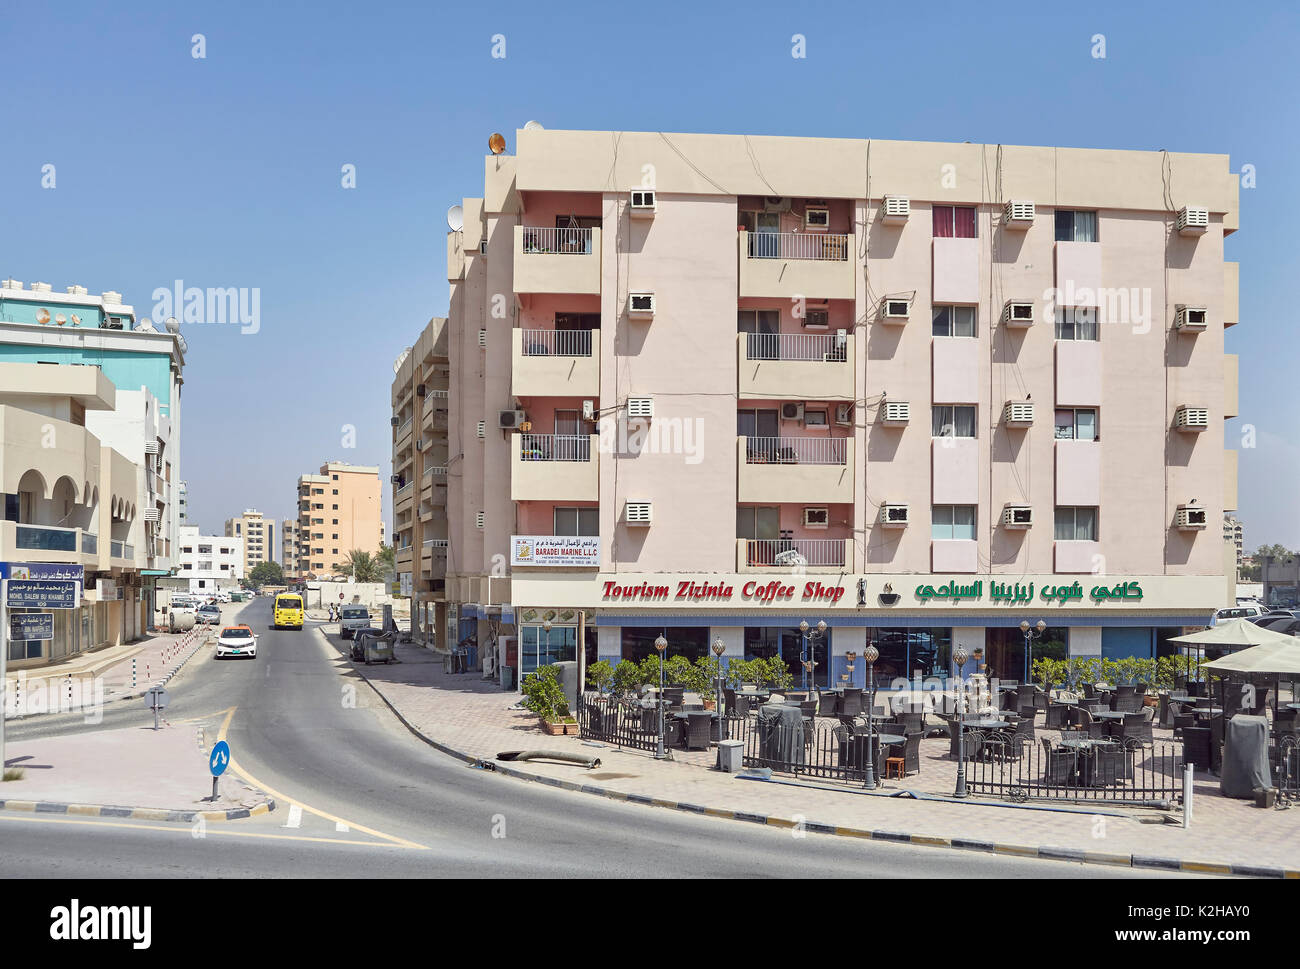 Ajman, United Arab Emirates - May 3, 2017: Street of Ajman on a summer day, the capital of the emirate of Ajman. Stock Photo